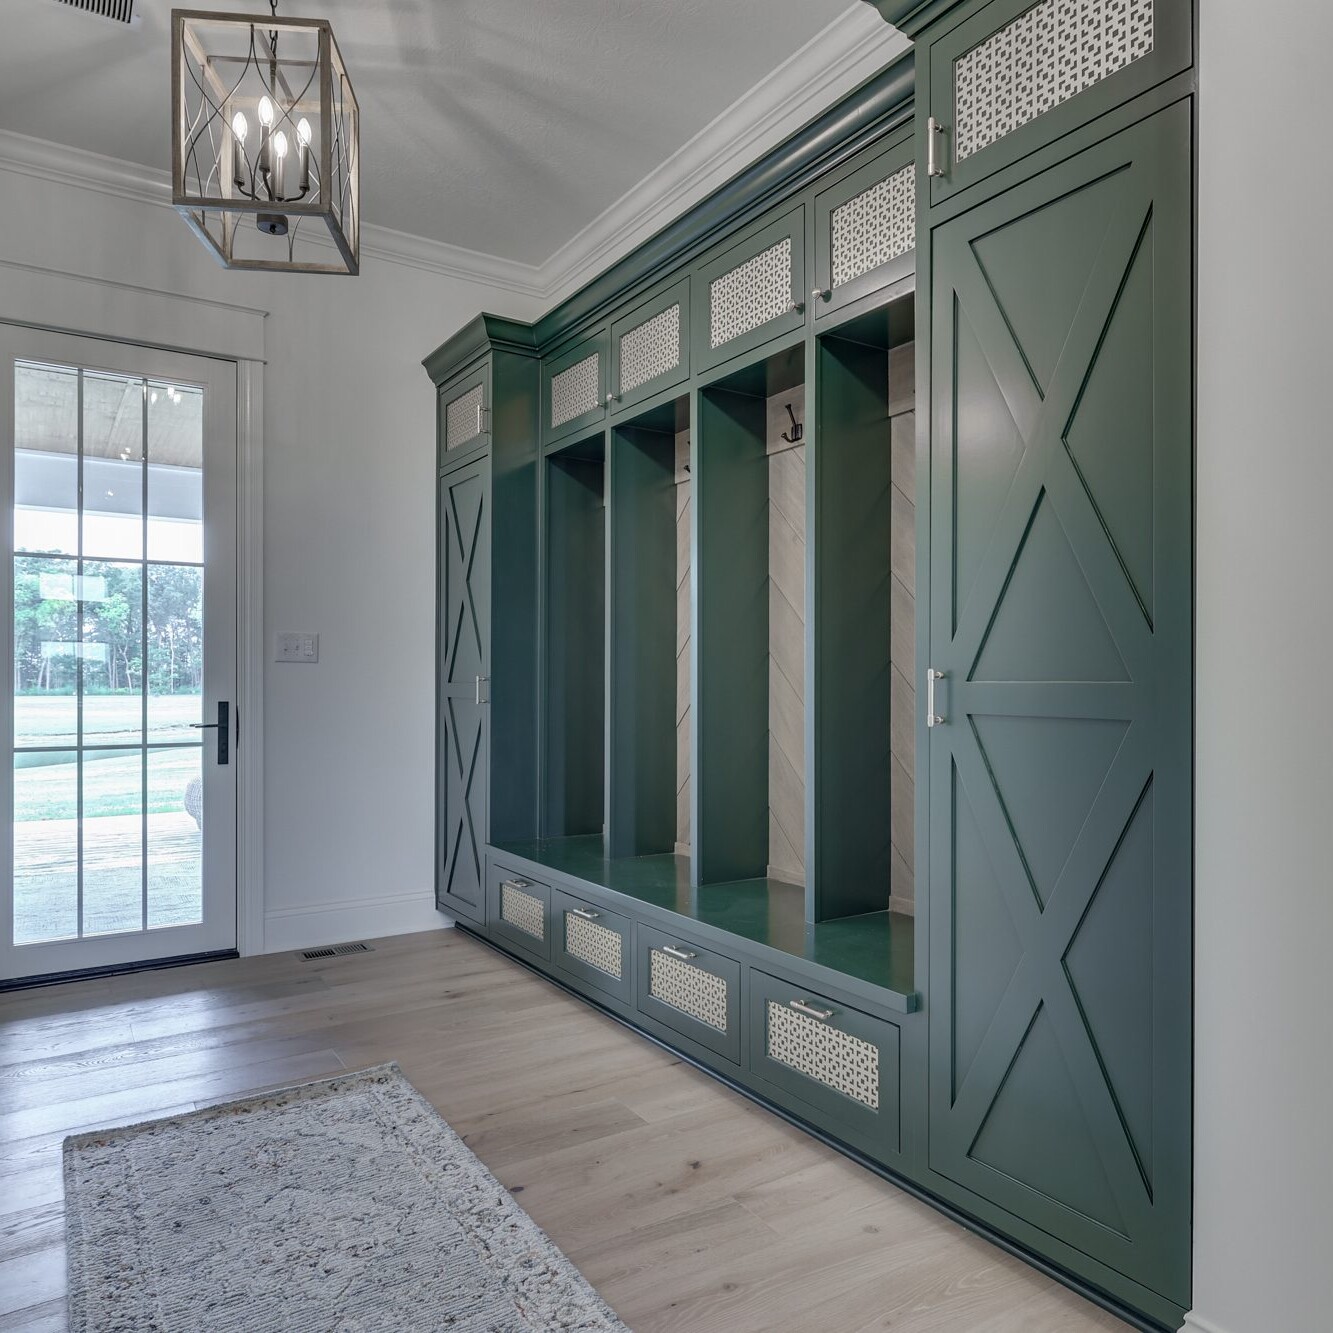 A green mudroom with wooden cabinets and a door.